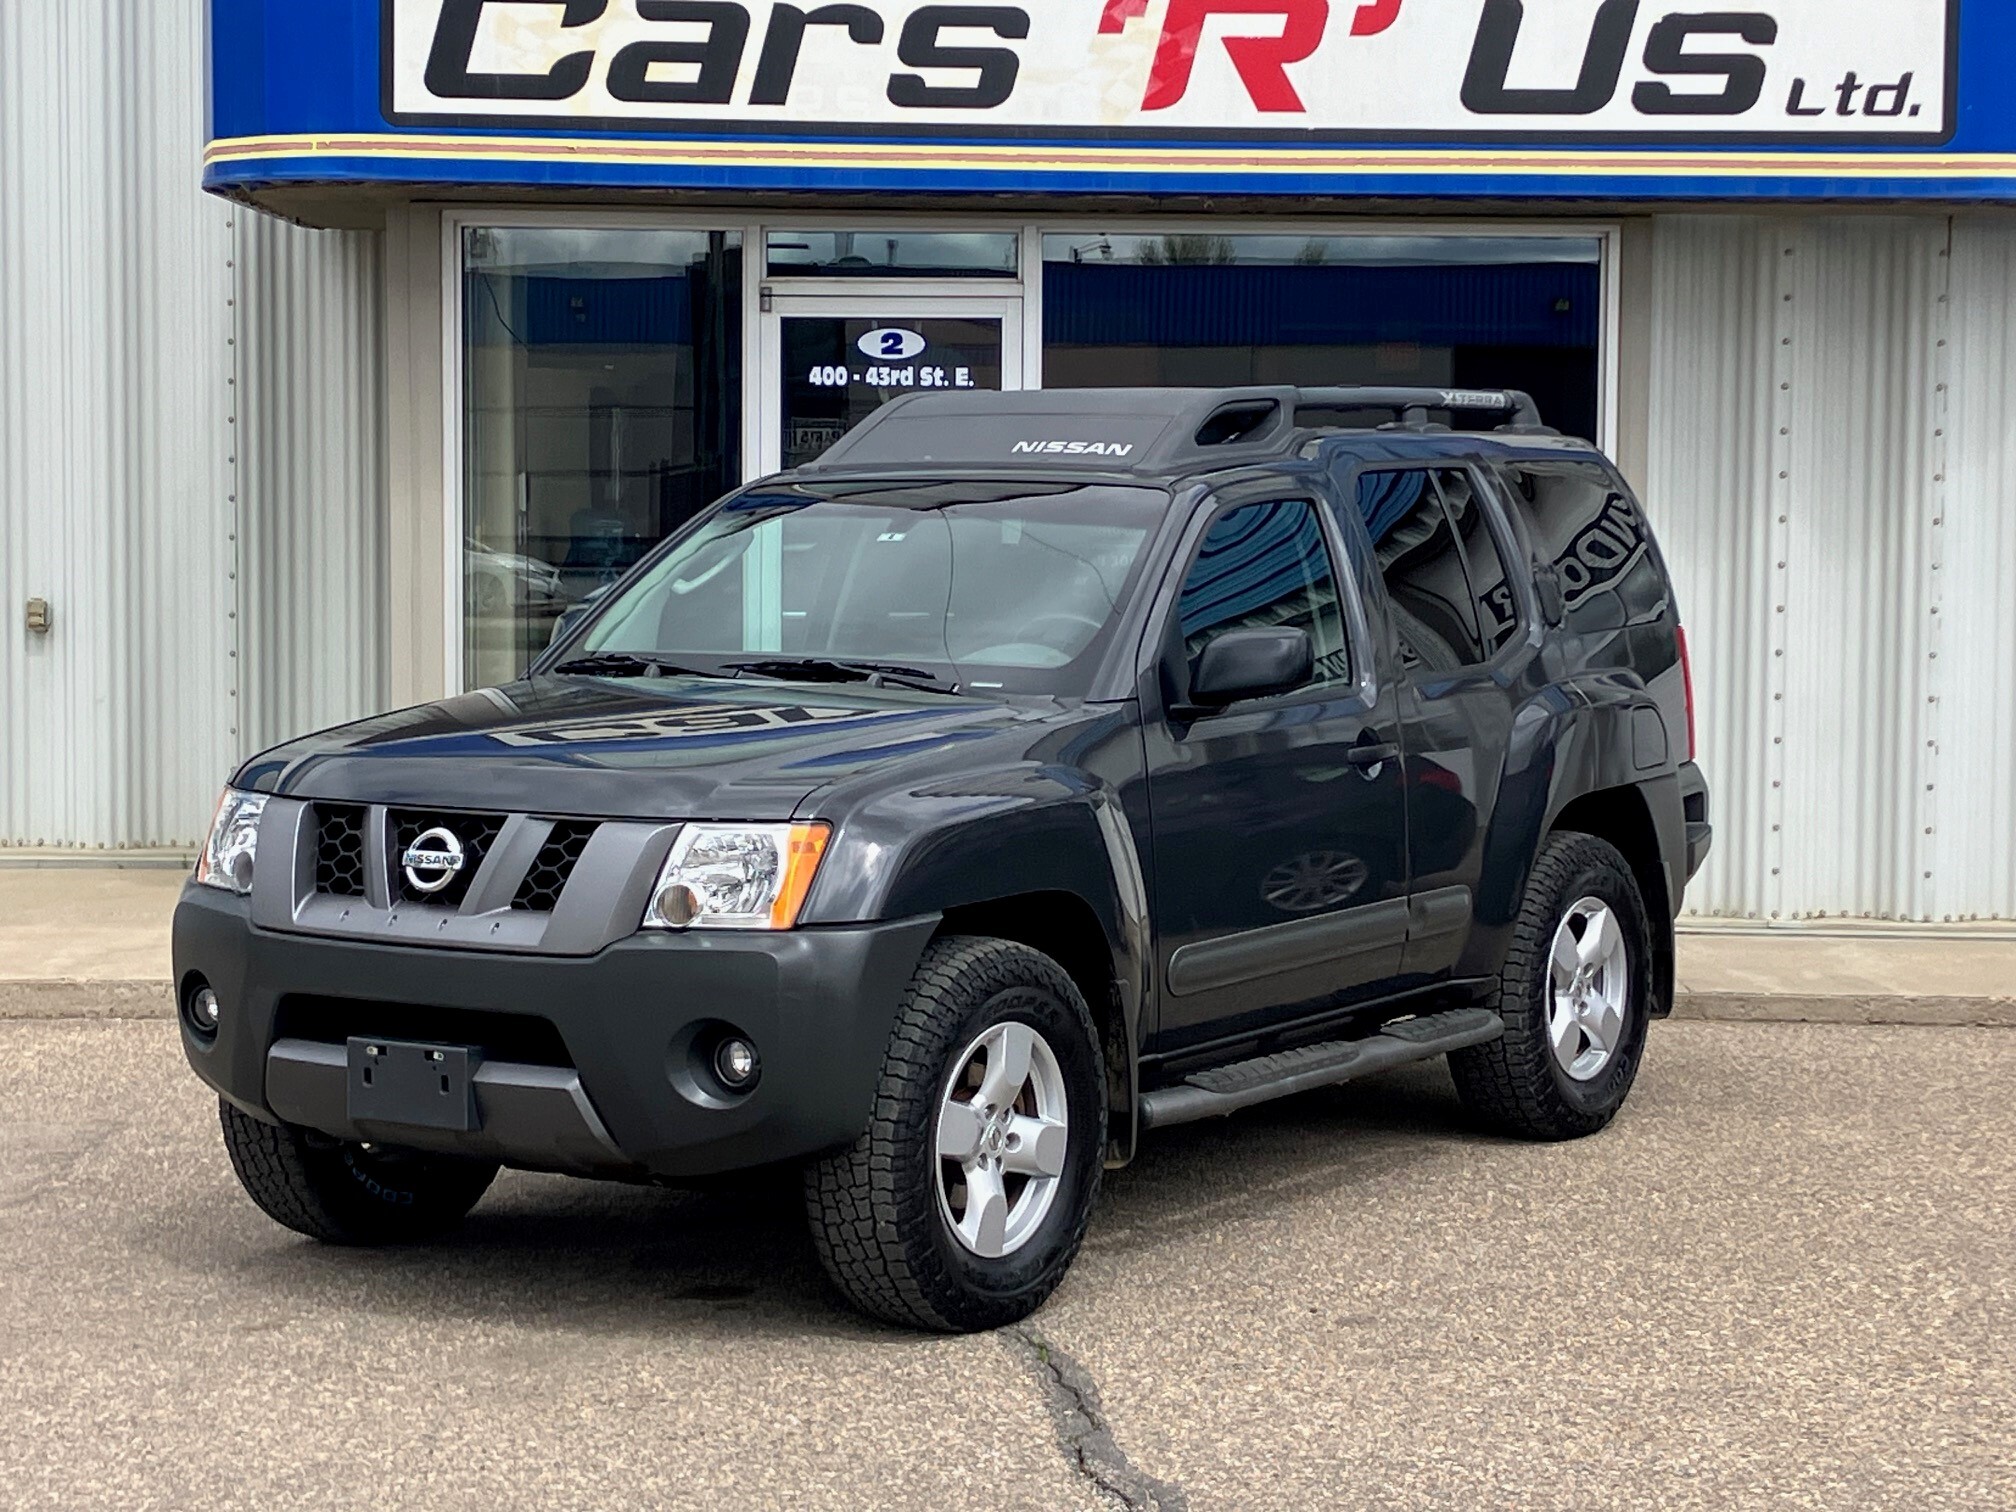 2005 Nissan Xterra 4dr S 4WD V6 Auto CLOTH LOADED ONLY 125K!